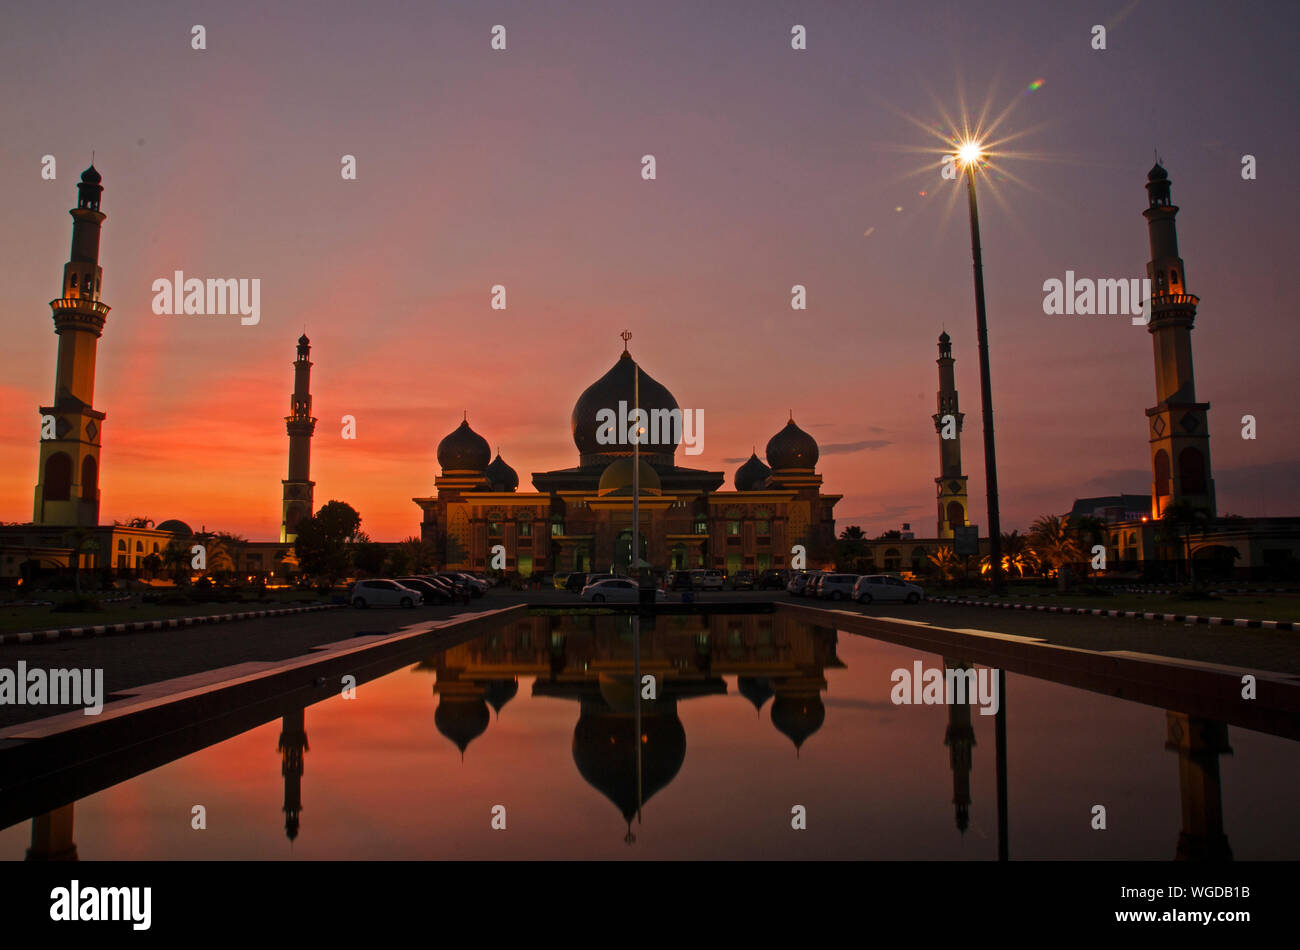 Facade Of An Nur Great Mosque Against Sky During Sunset Stock Photo